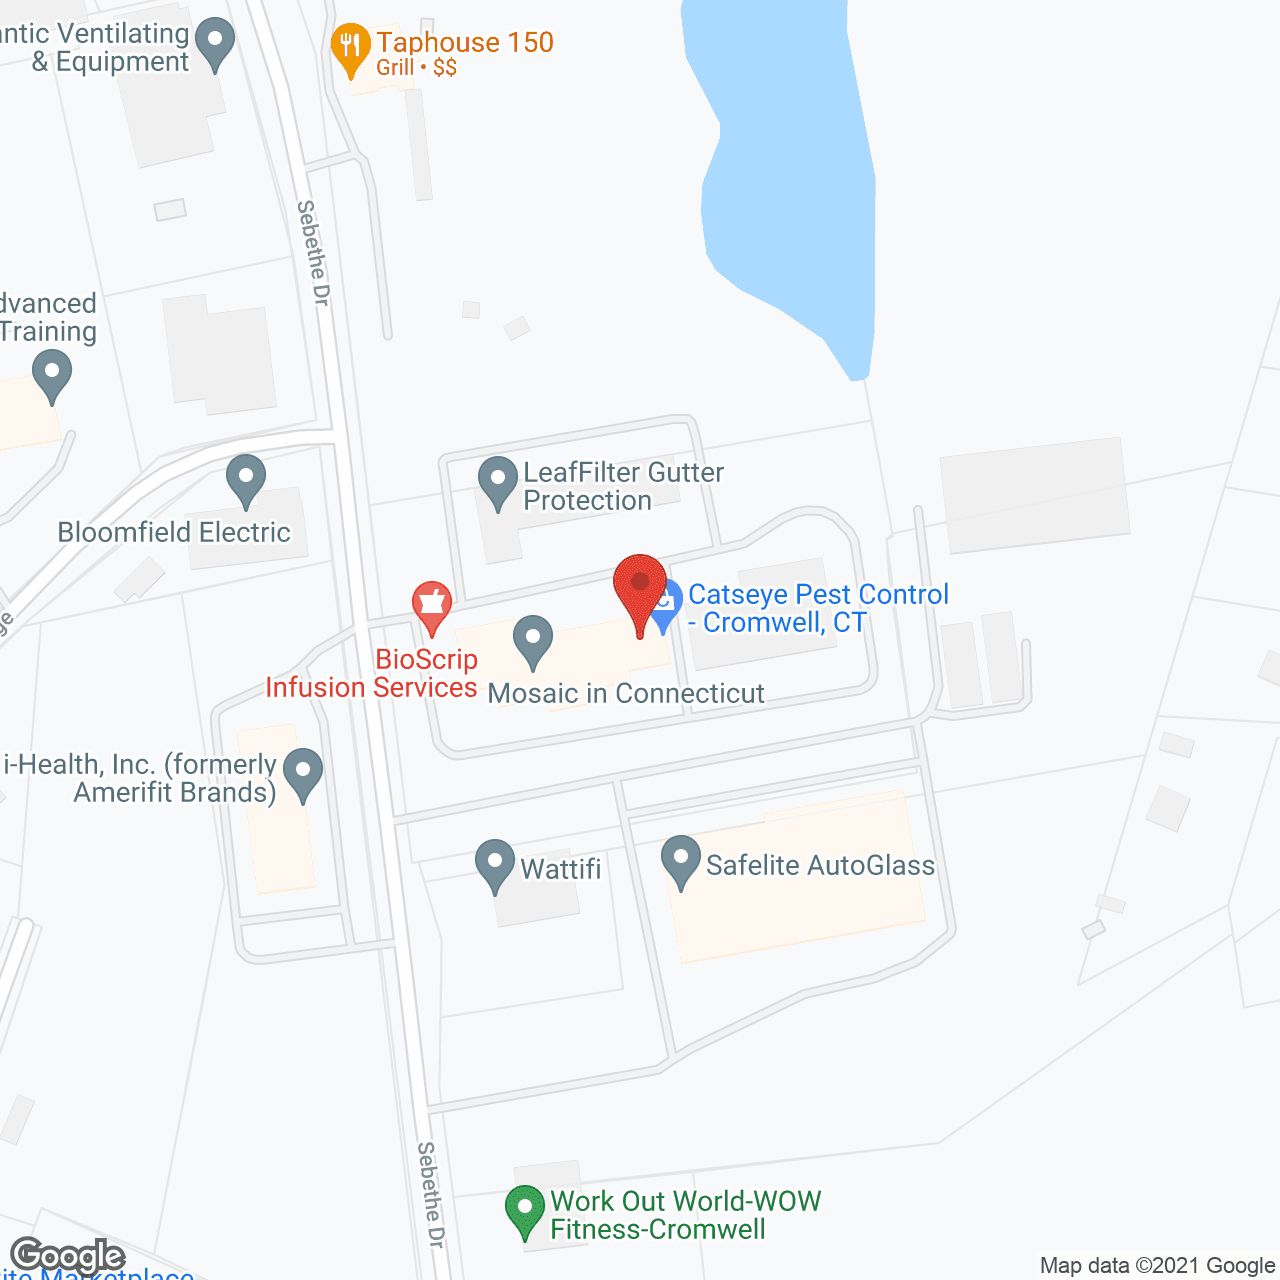 Respracare Lincare in google map